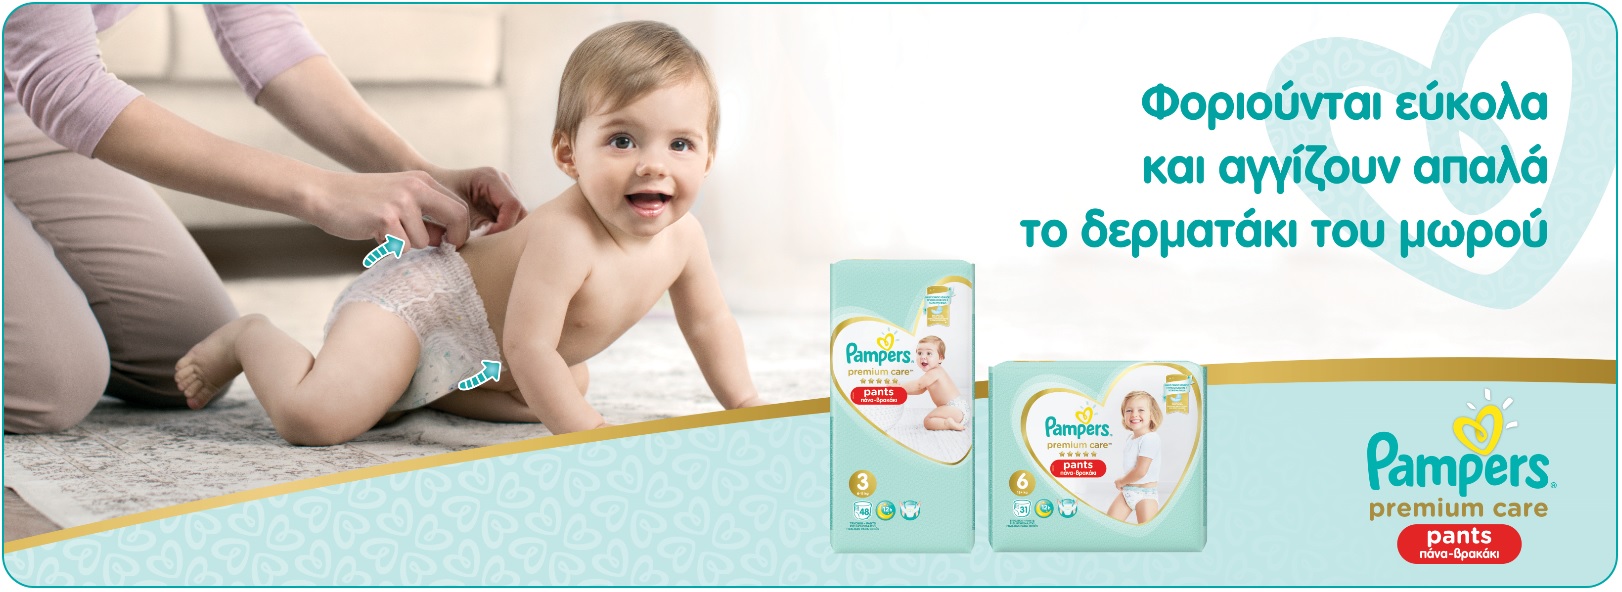 Your favourite Pampers diapers